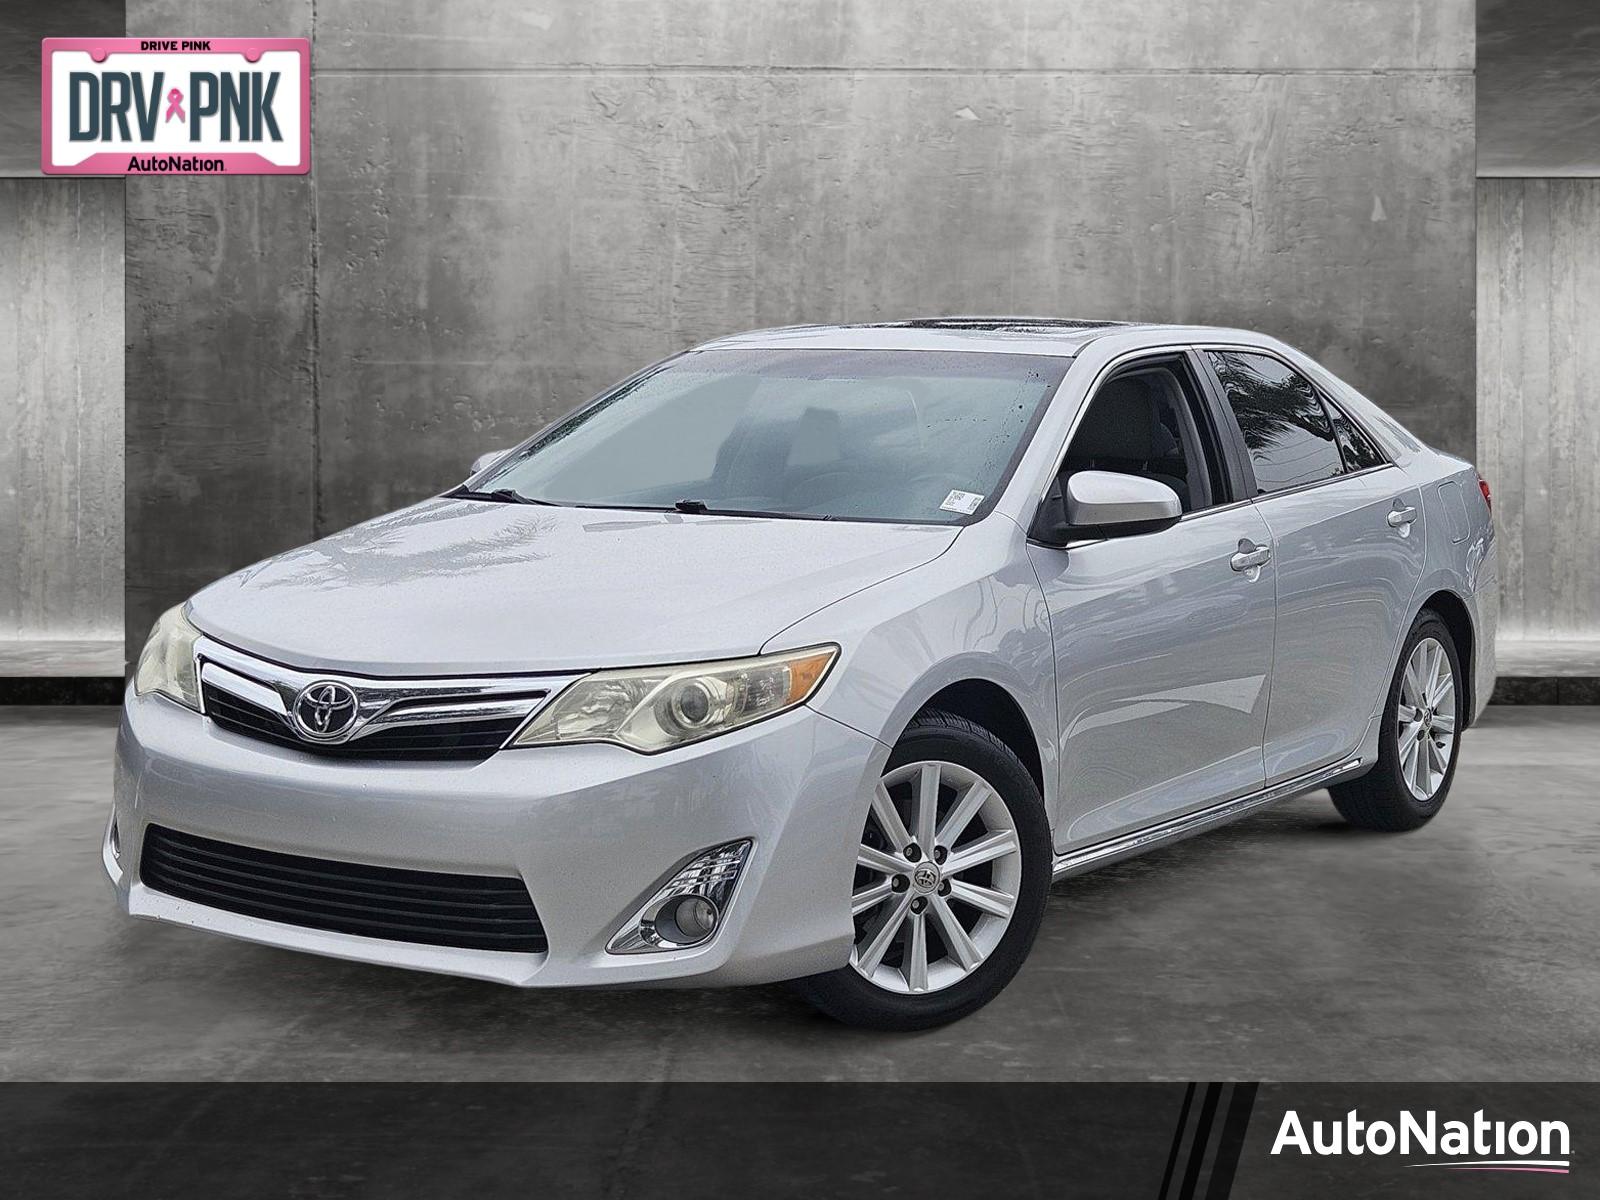 2014 Toyota Camry Vehicle Photo in Coconut Creek, FL 33073